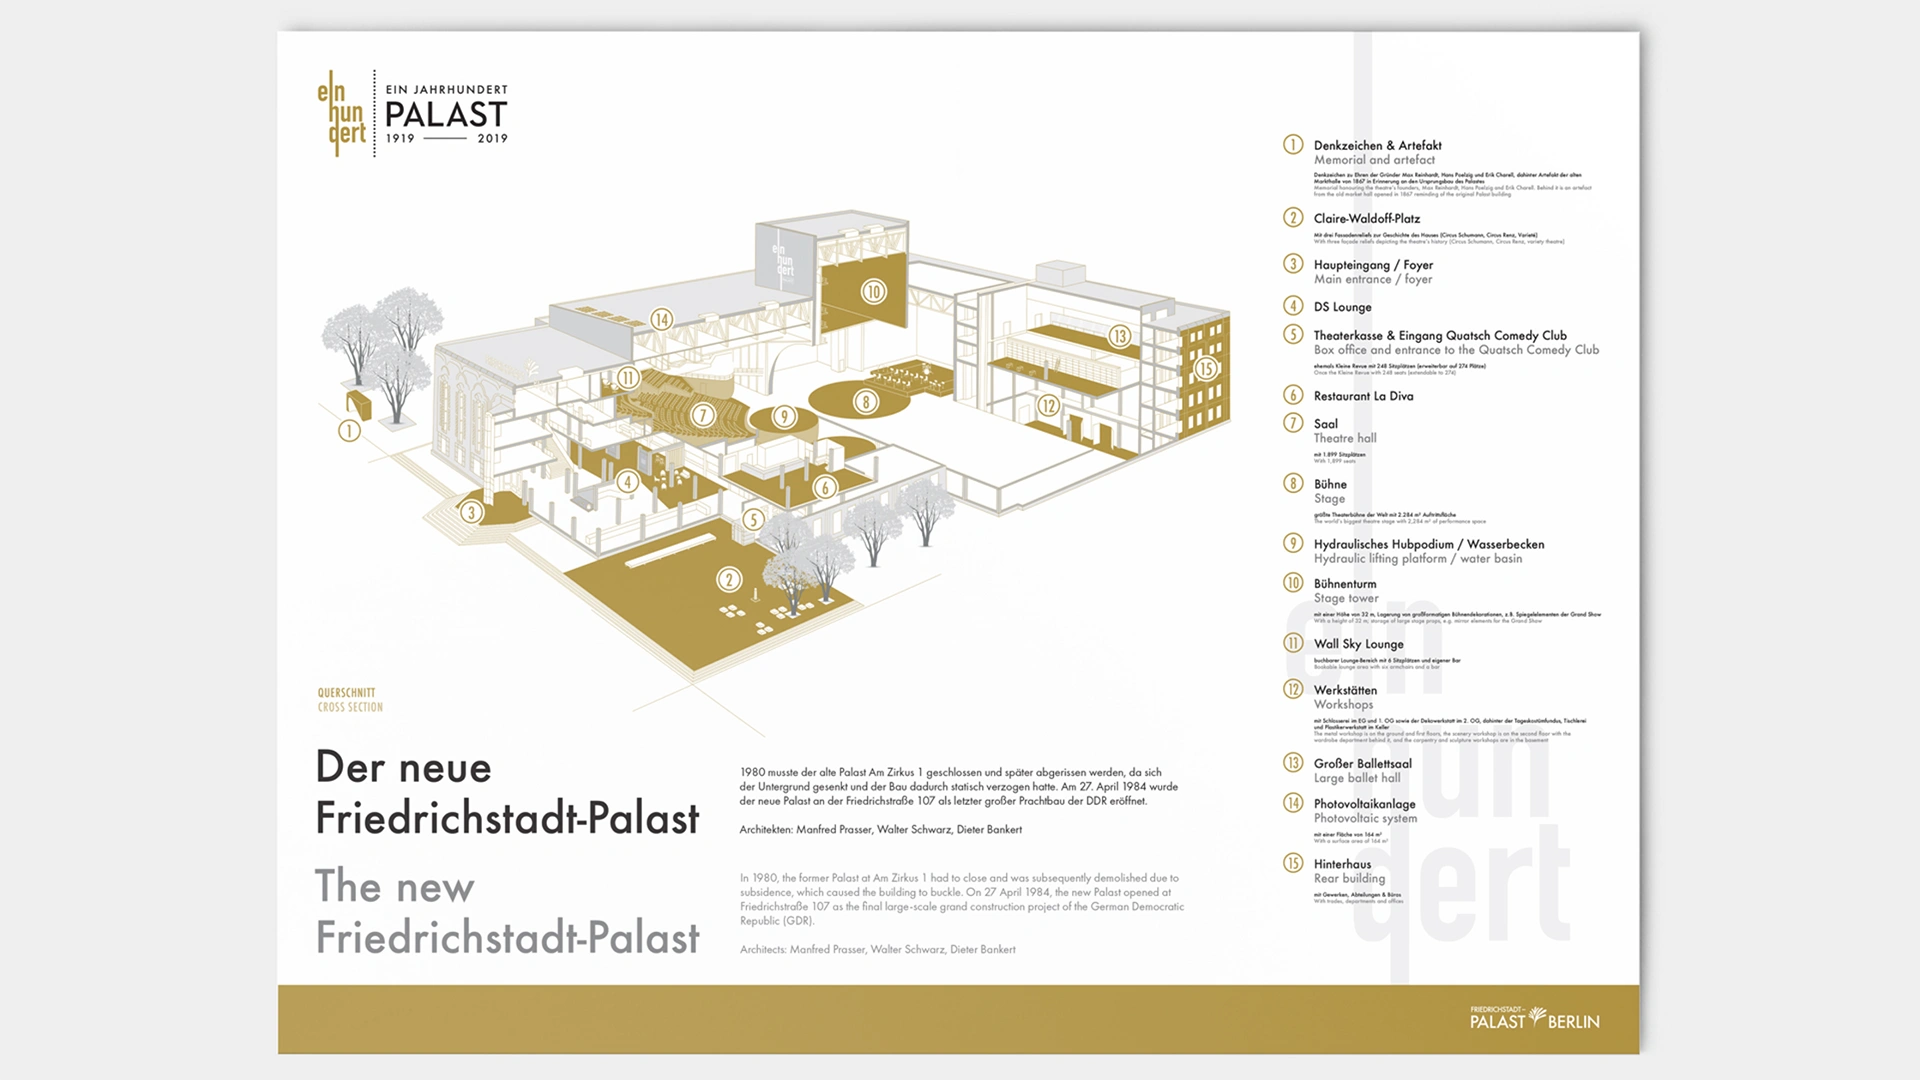 A picture shows the new site plan for the anniversary "100 years" Friedrichstadtpalast Berlin.